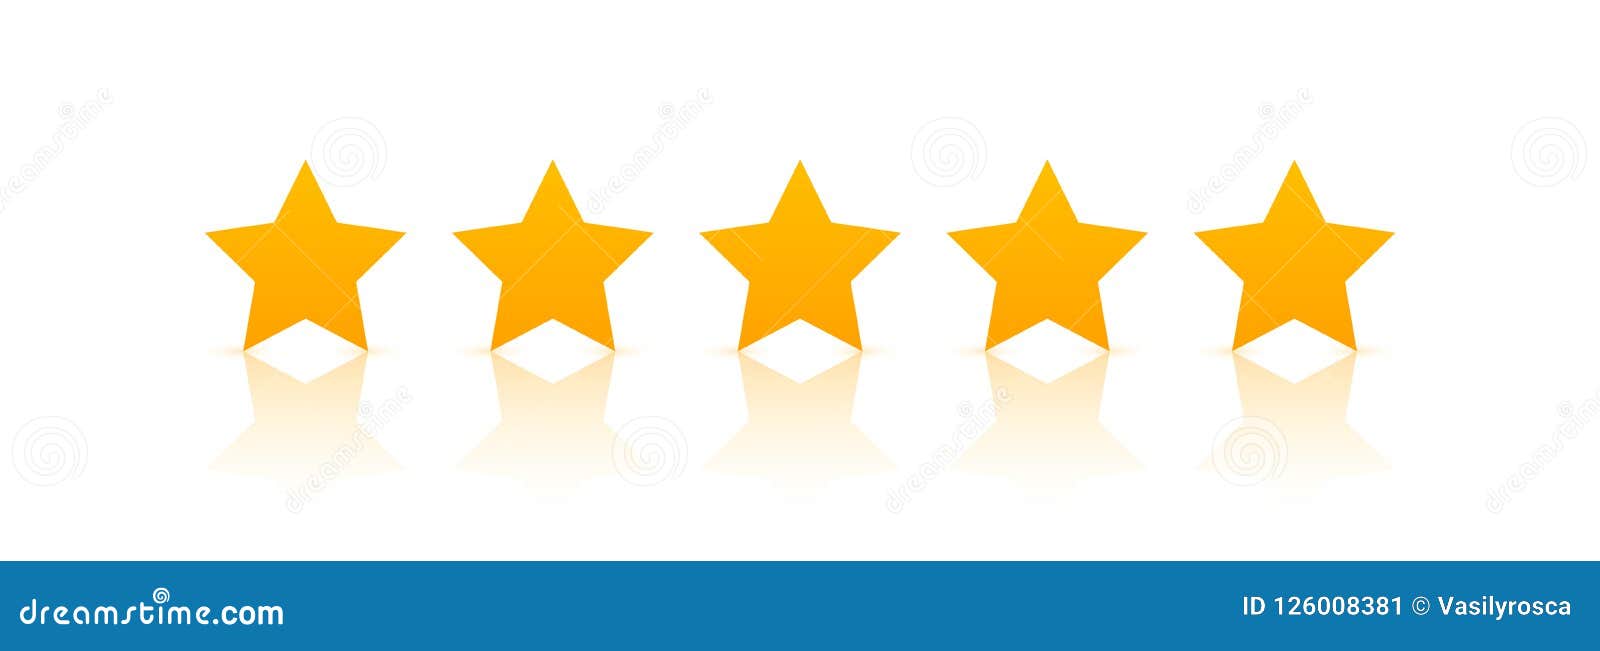 5 star rating icon . rate vote like ranking 